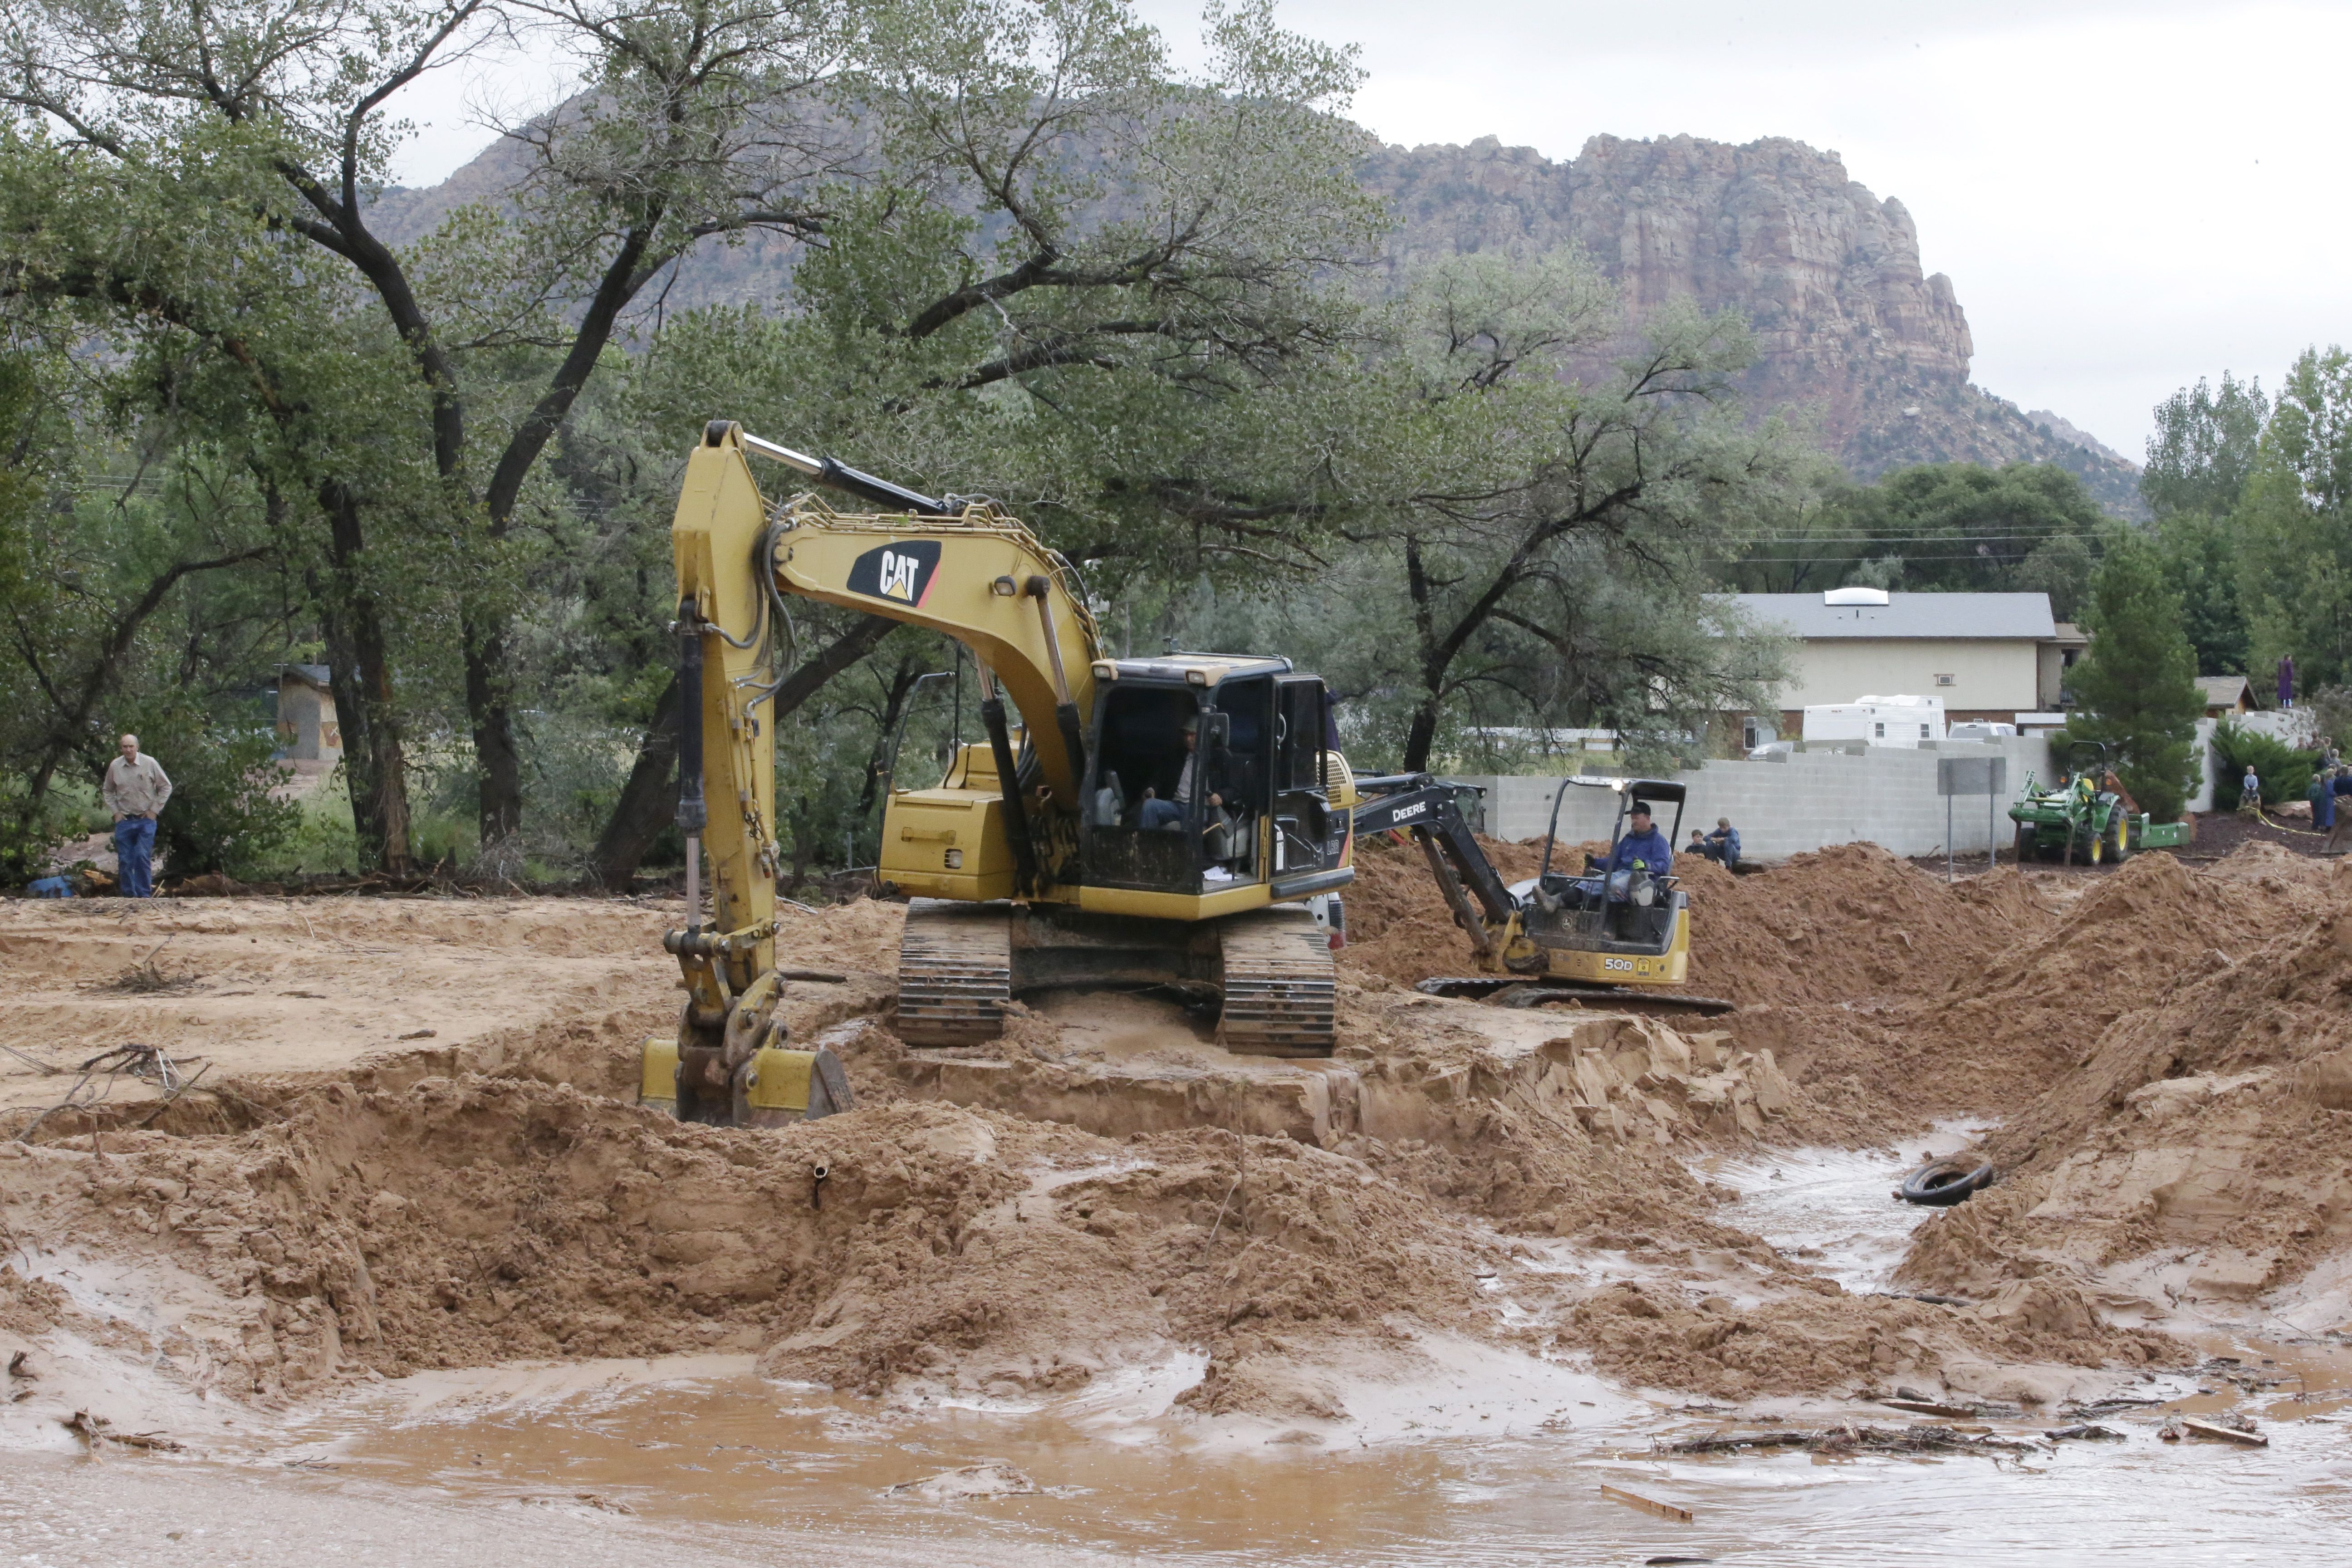 Crews clear mud and debris from a road following a flash flood Tuesday, Sept. 15, 2015, in Colorado City, Ariz. 